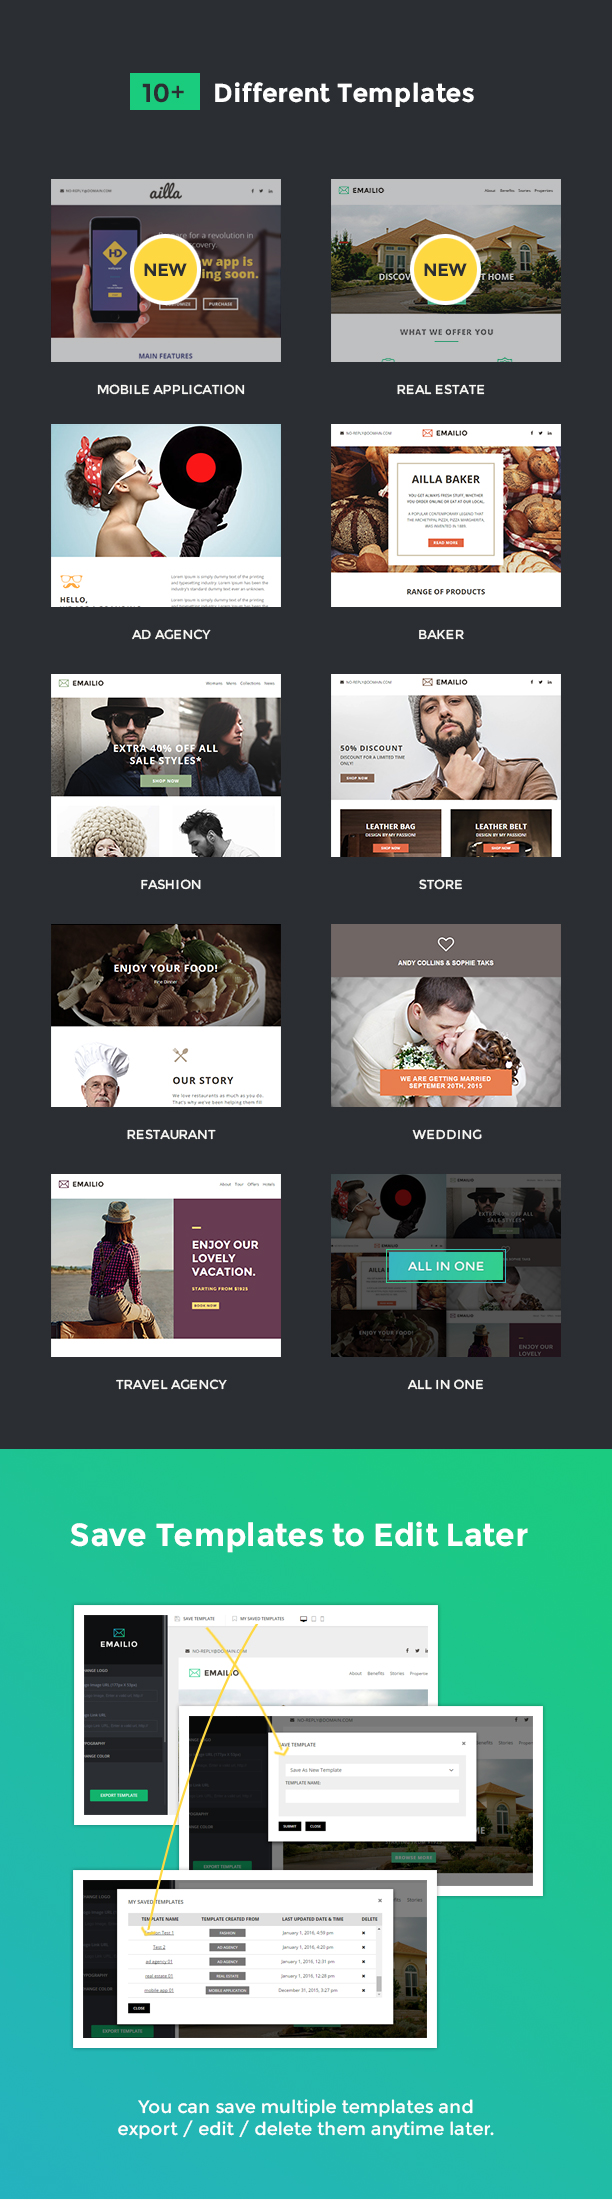 presentation3 - Emailio Responsive Multipurpose Email Template With Online Builder